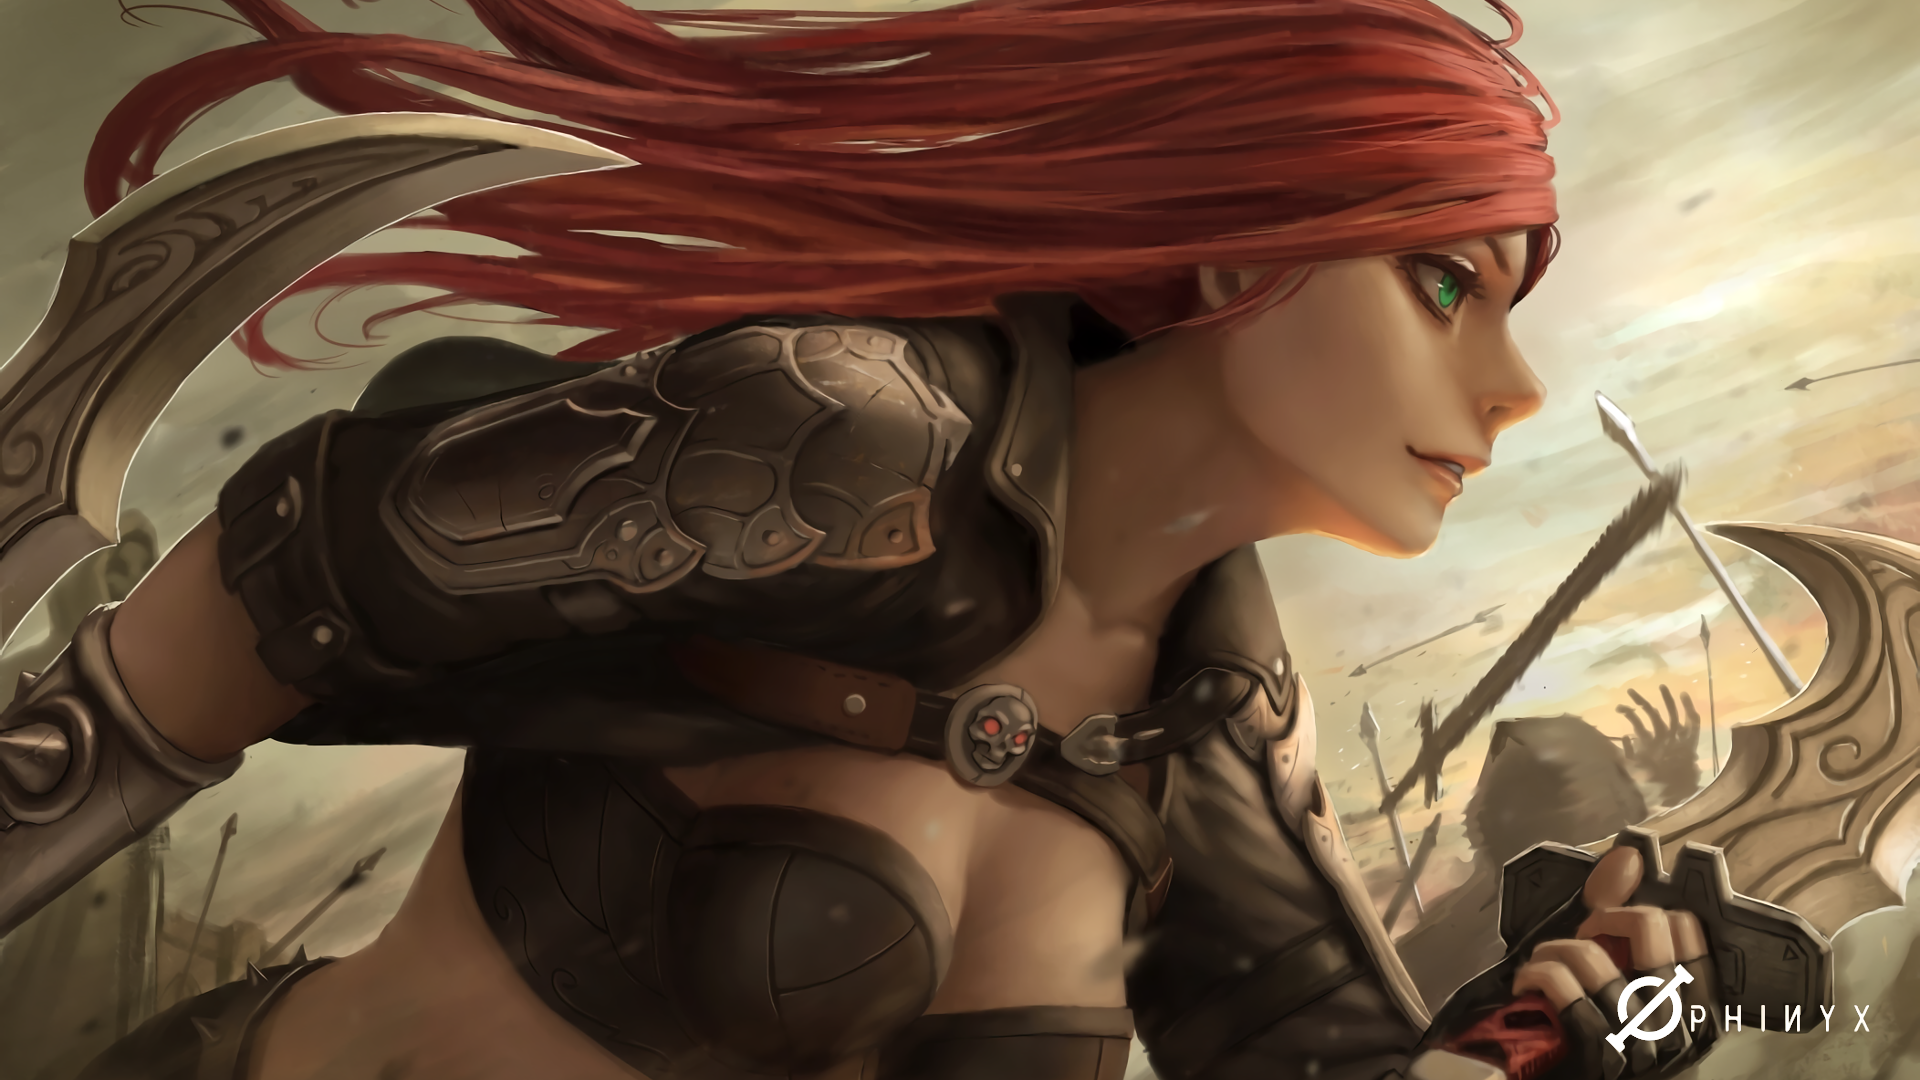 170+ Katarina (League Of Legends) HD Wallpapers and Backgrounds